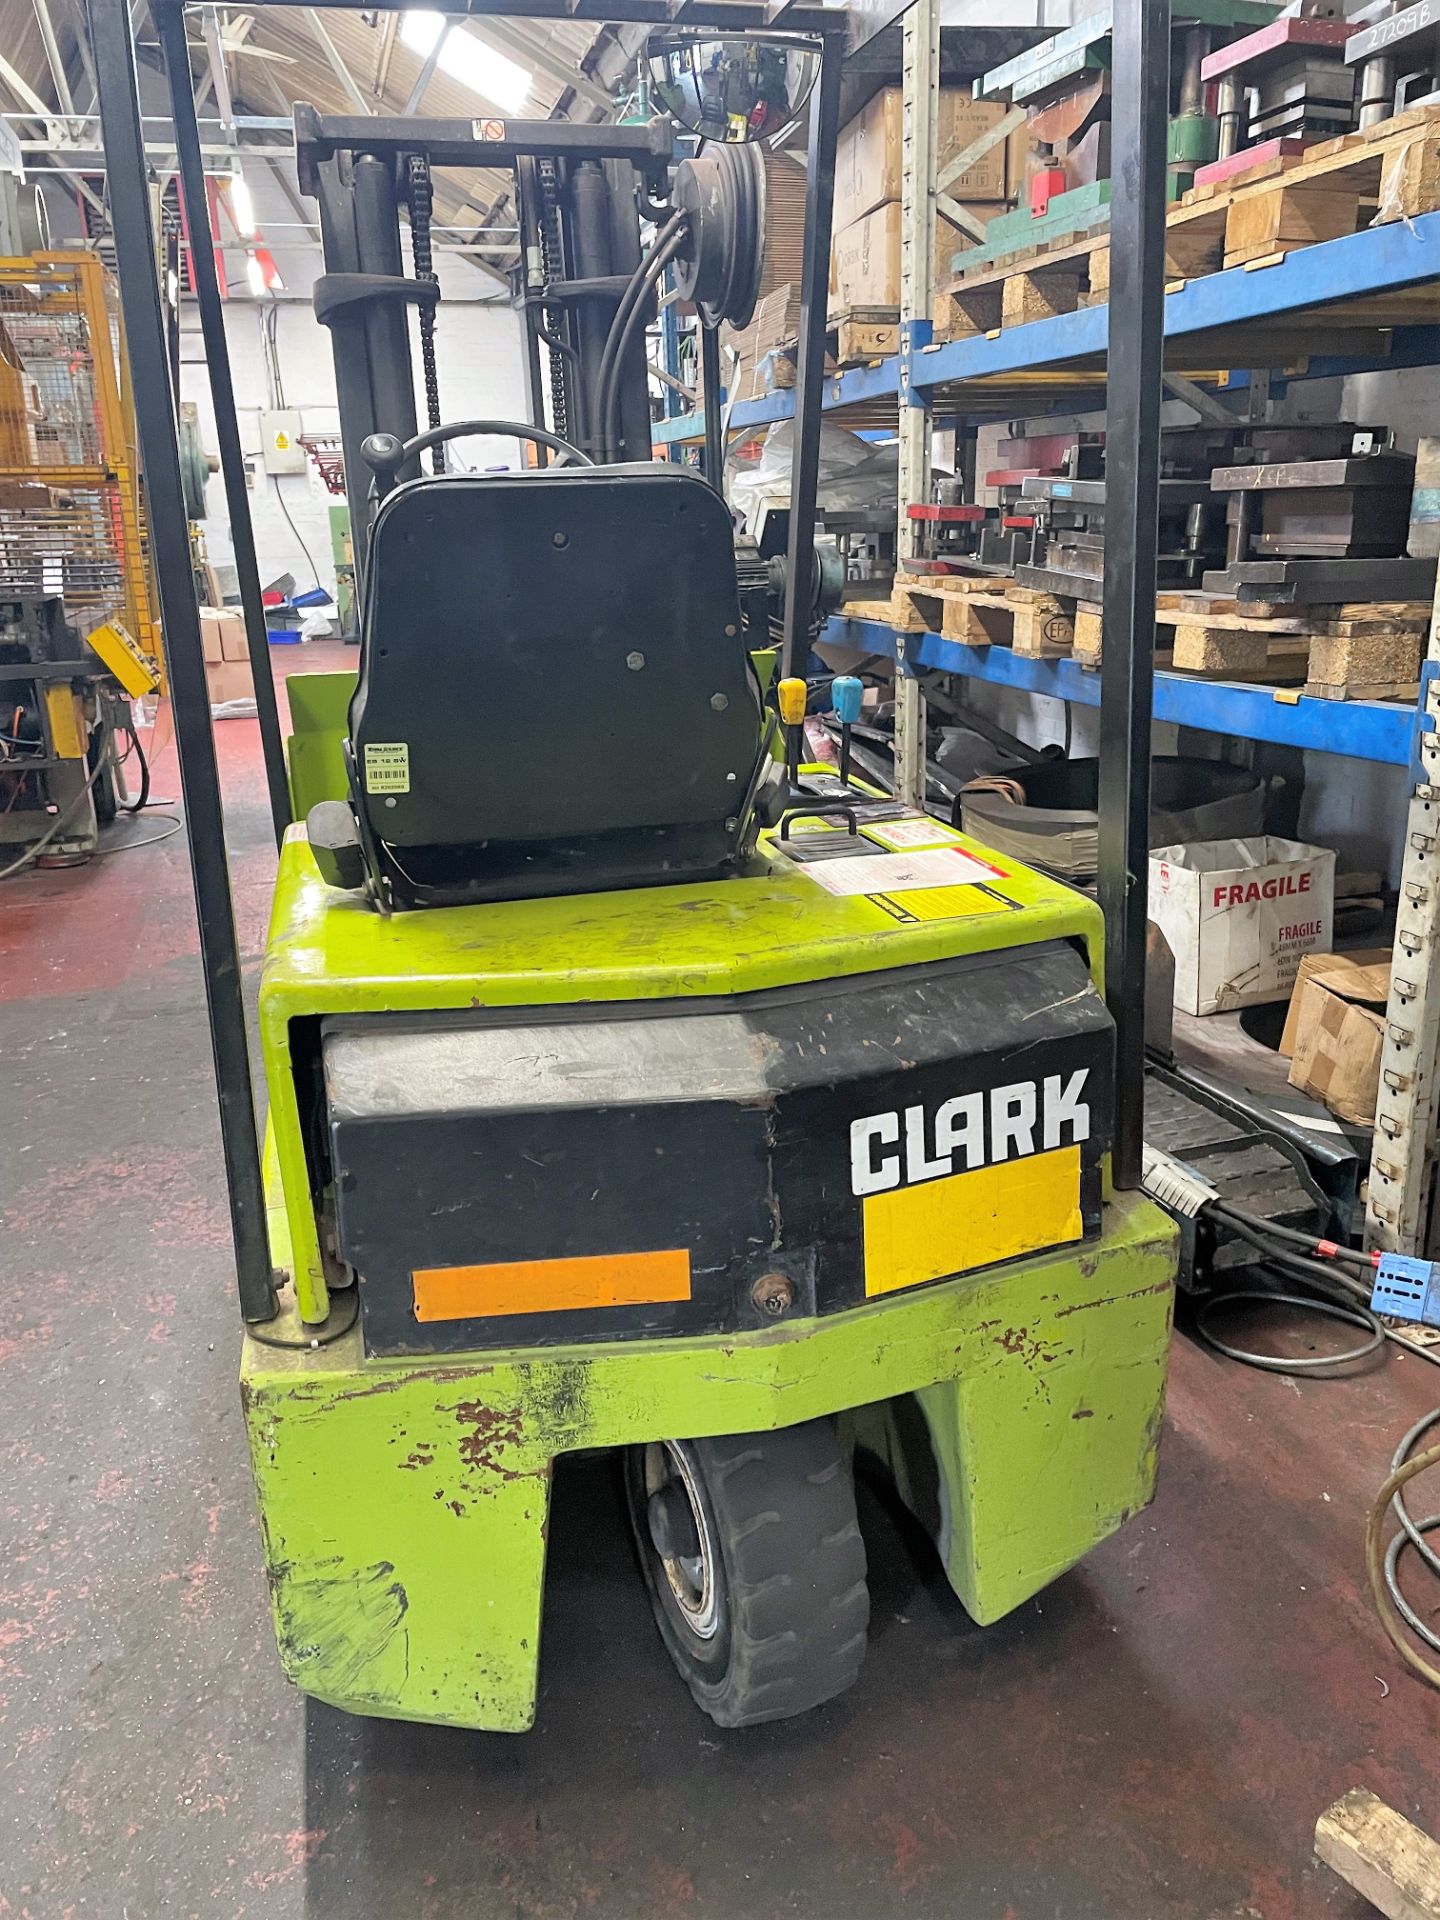 Clark TM15 3 Wheel Fork Lift Truck cw Charger - Image 5 of 10